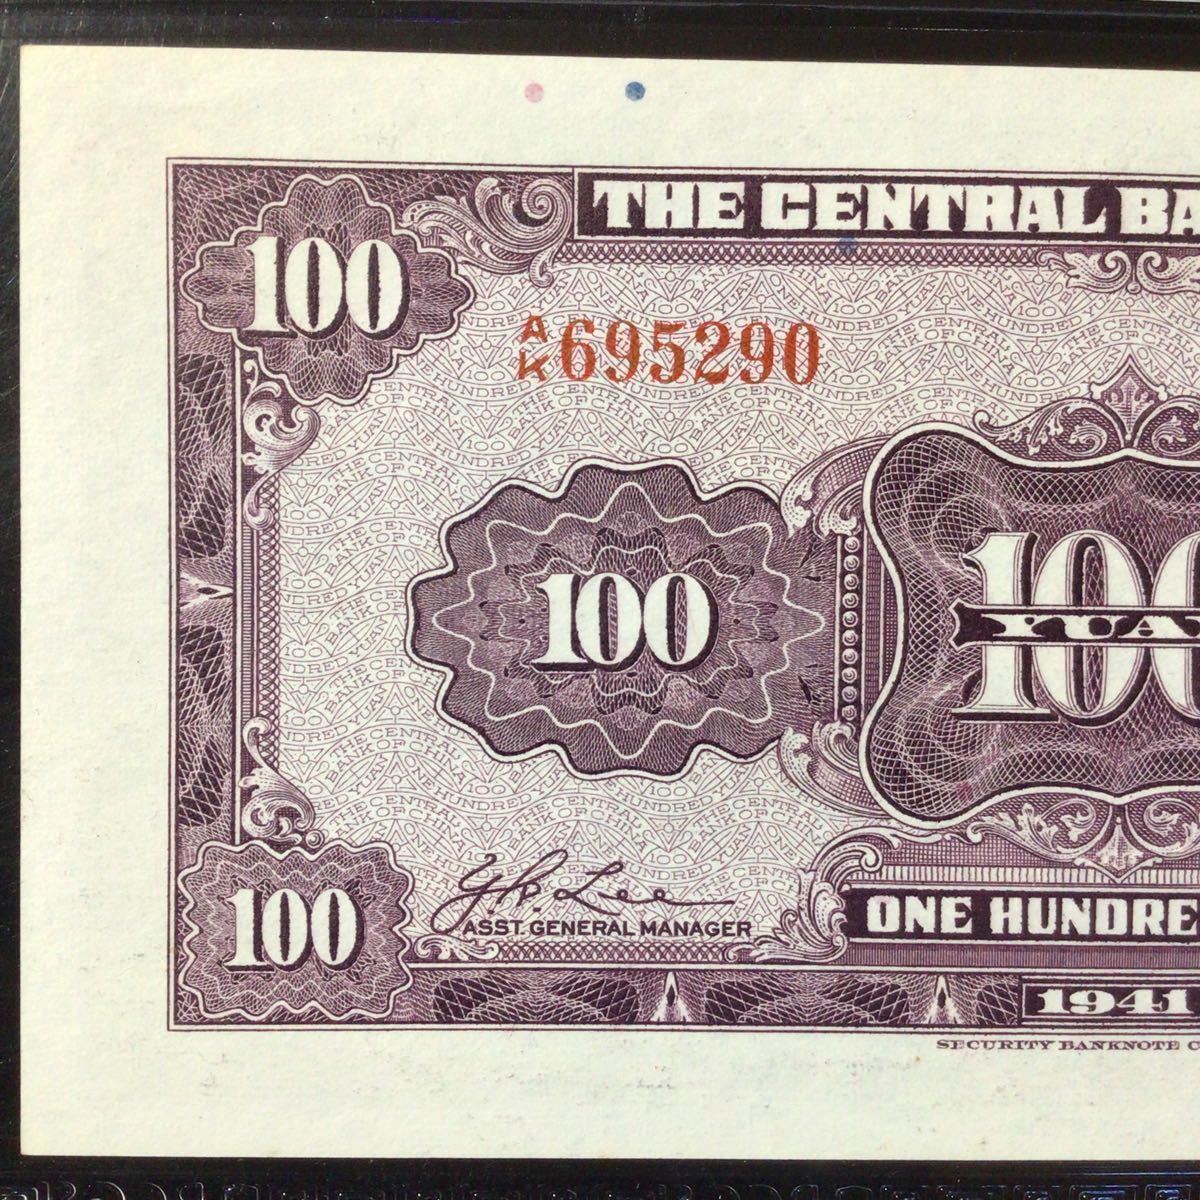 World Banknote Grading CHINA《 The Central Bank of China 》100 Yuan【1941】『PCGS Grading Choice AU 58 PPQ』_画像5